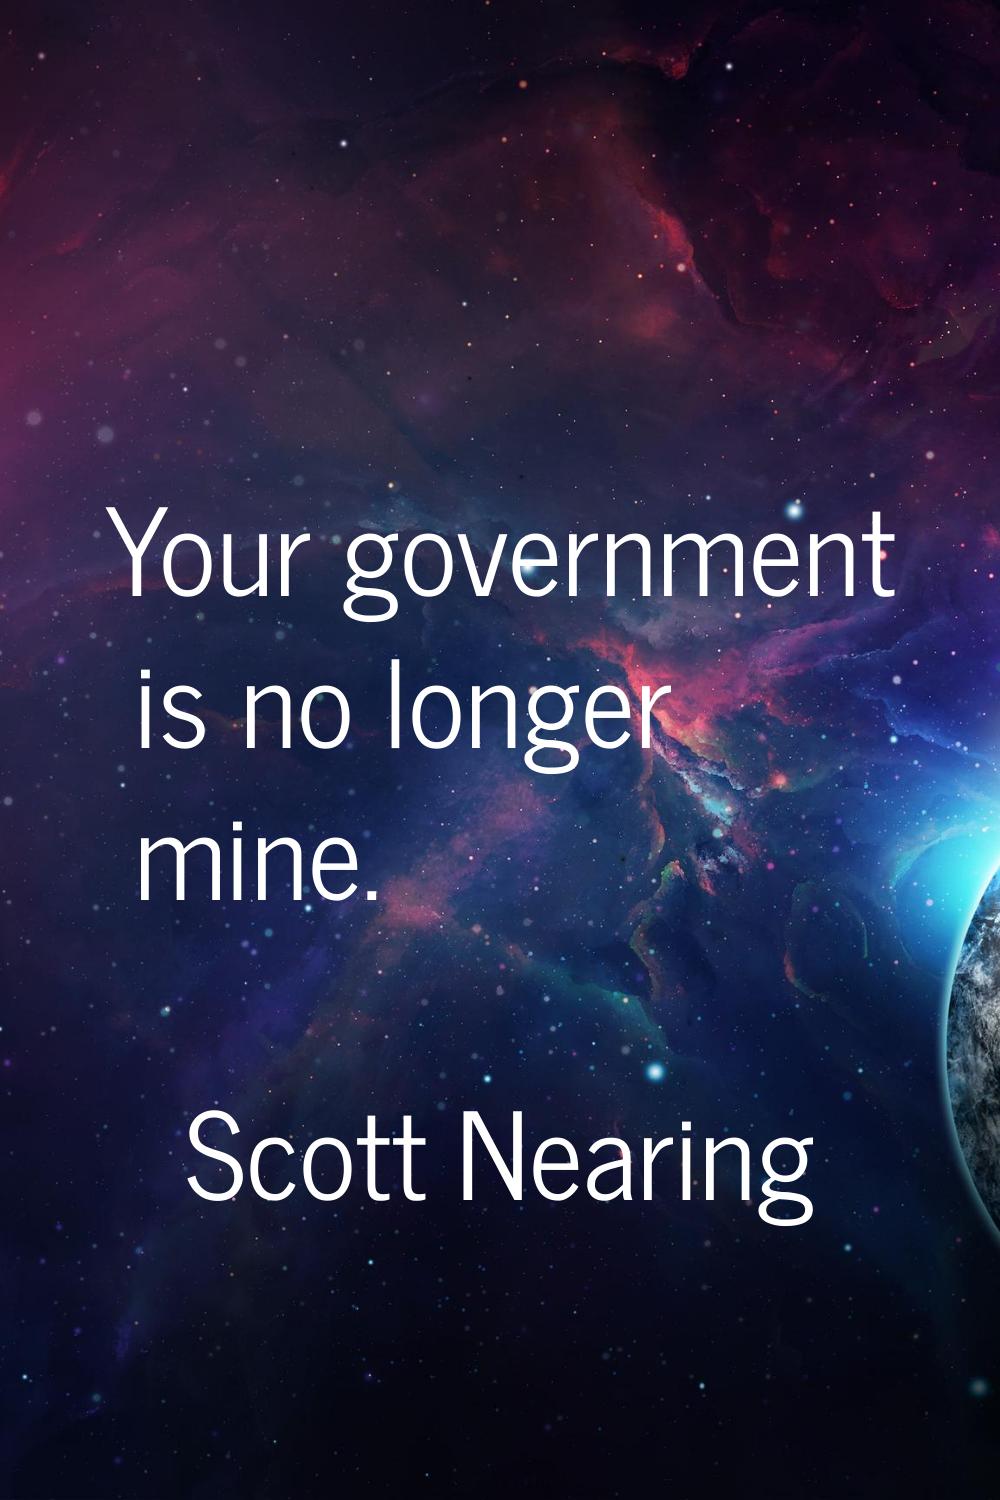 Your government is no longer mine.